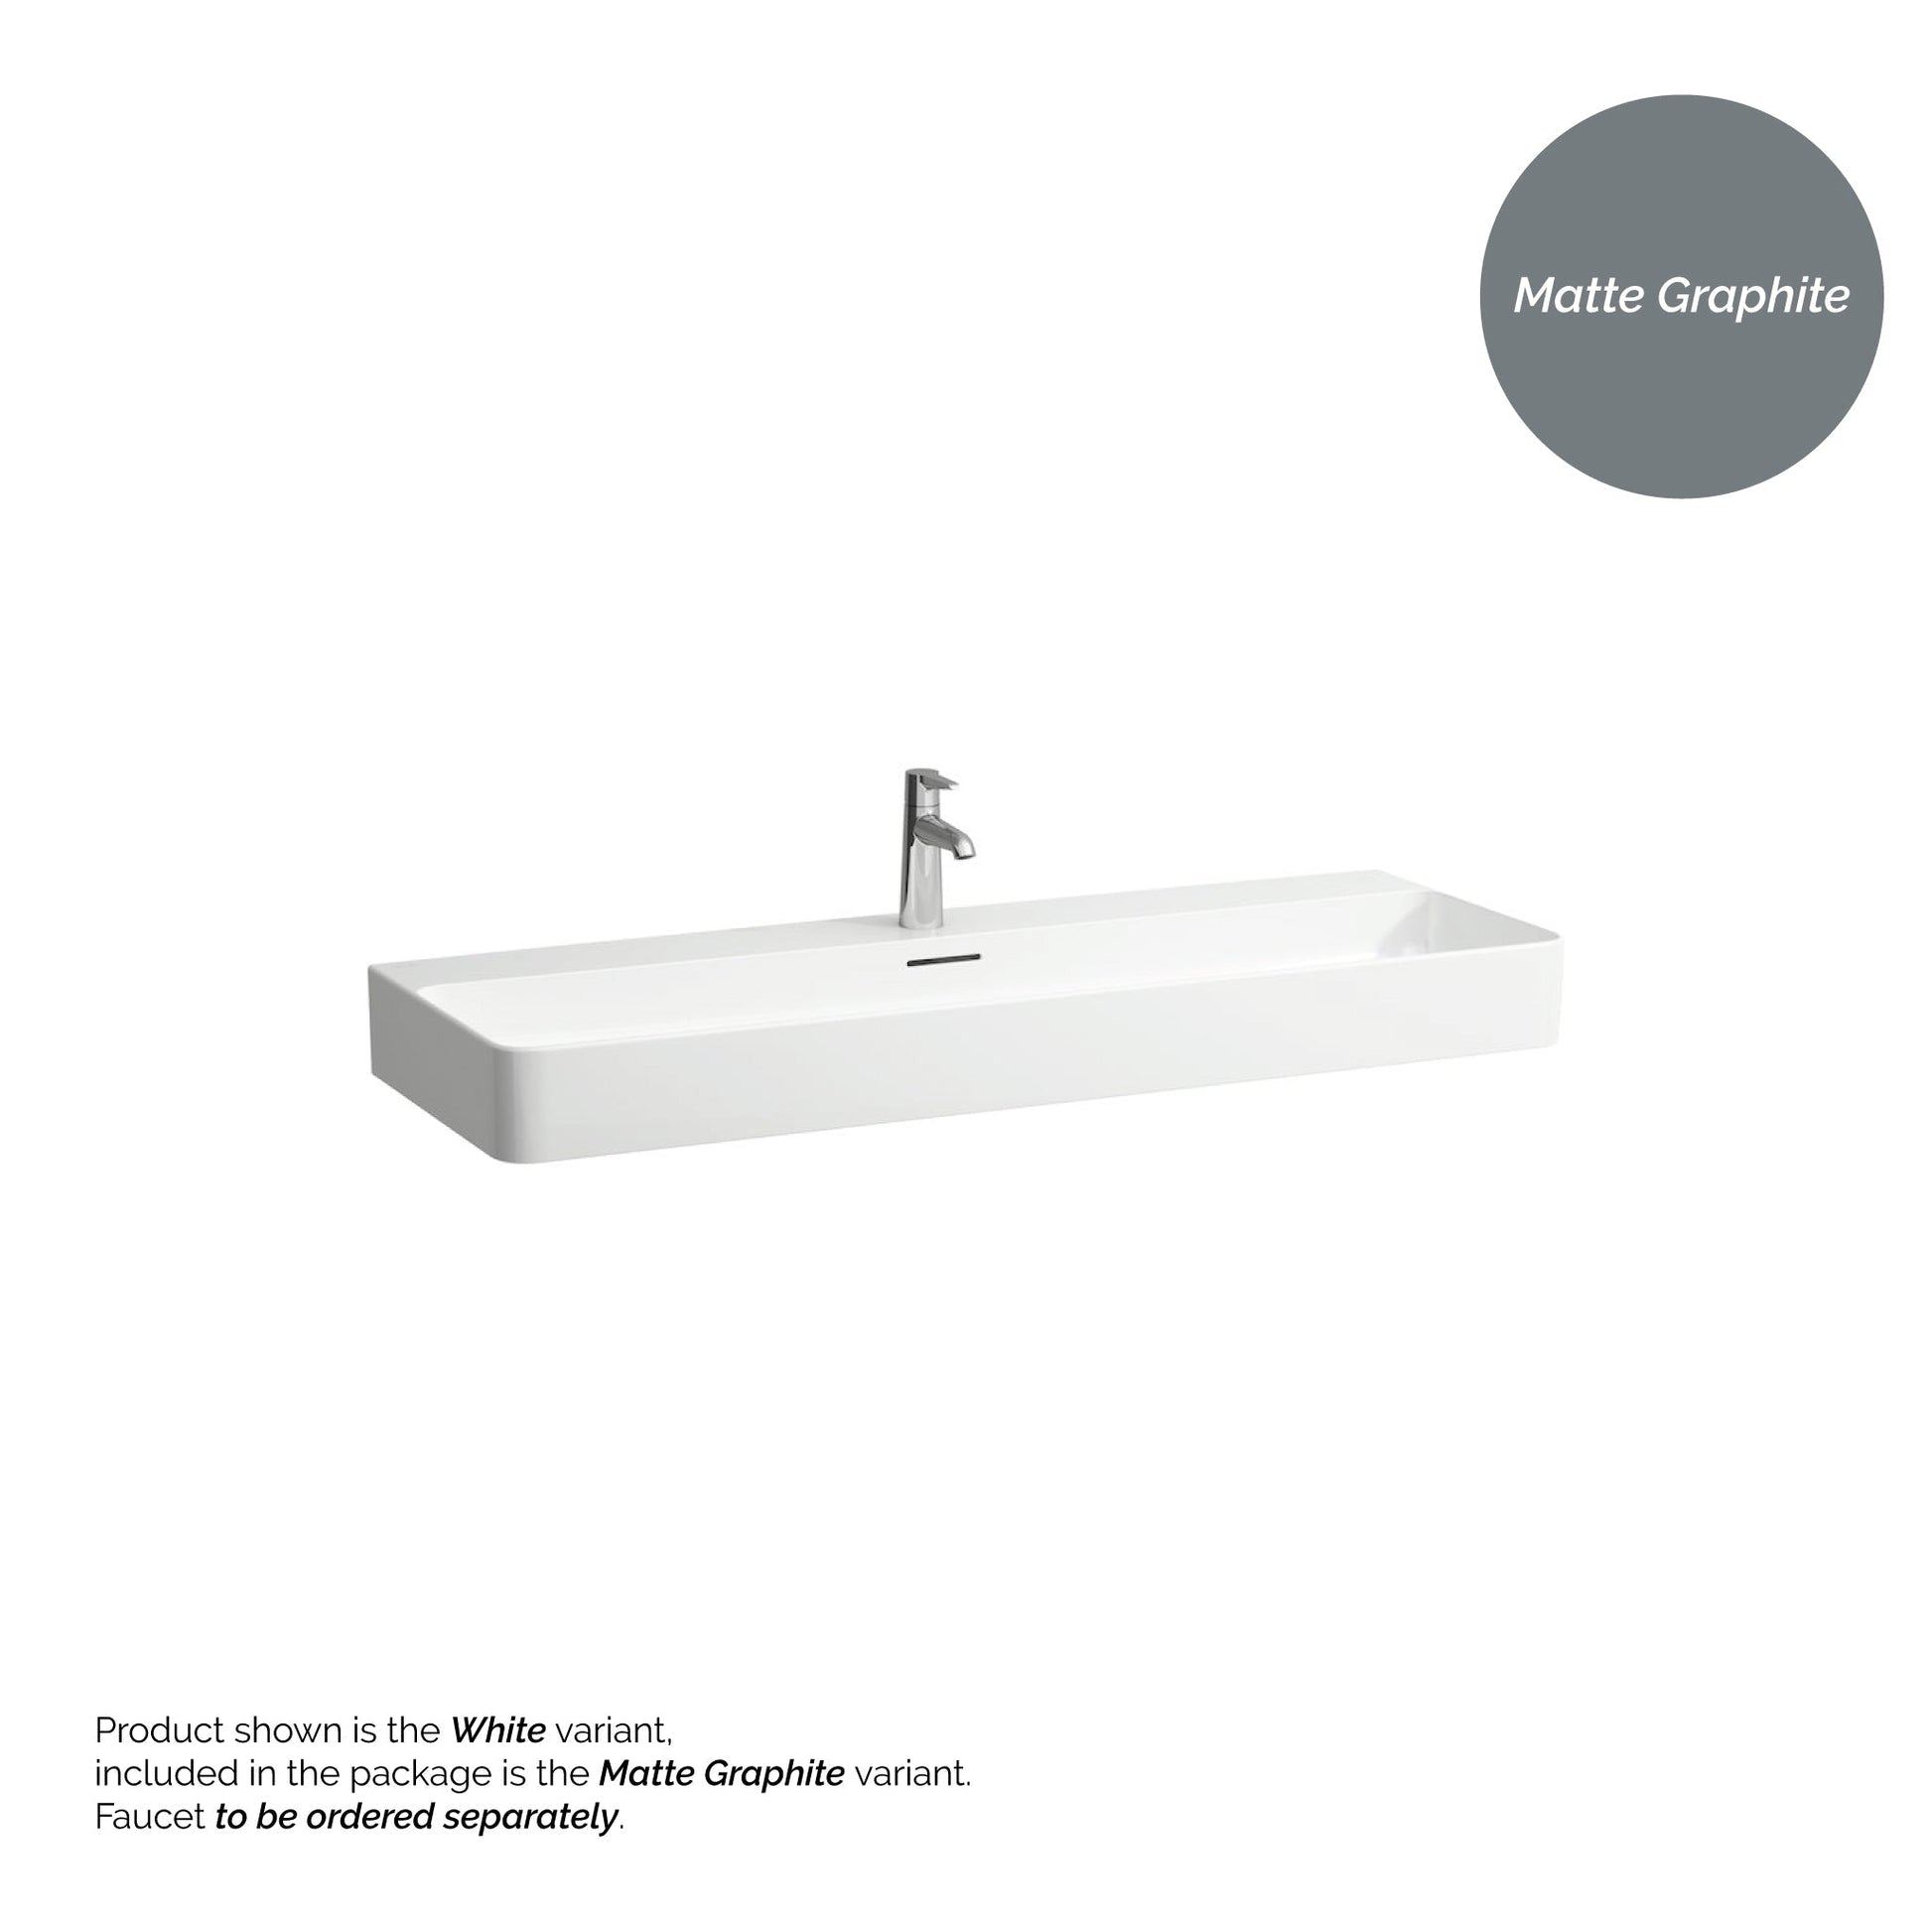 Laufen Val 47" x 17" Matte Graphite Ceramic Wall-Mounted Bathroom Sink With Faucet Hole